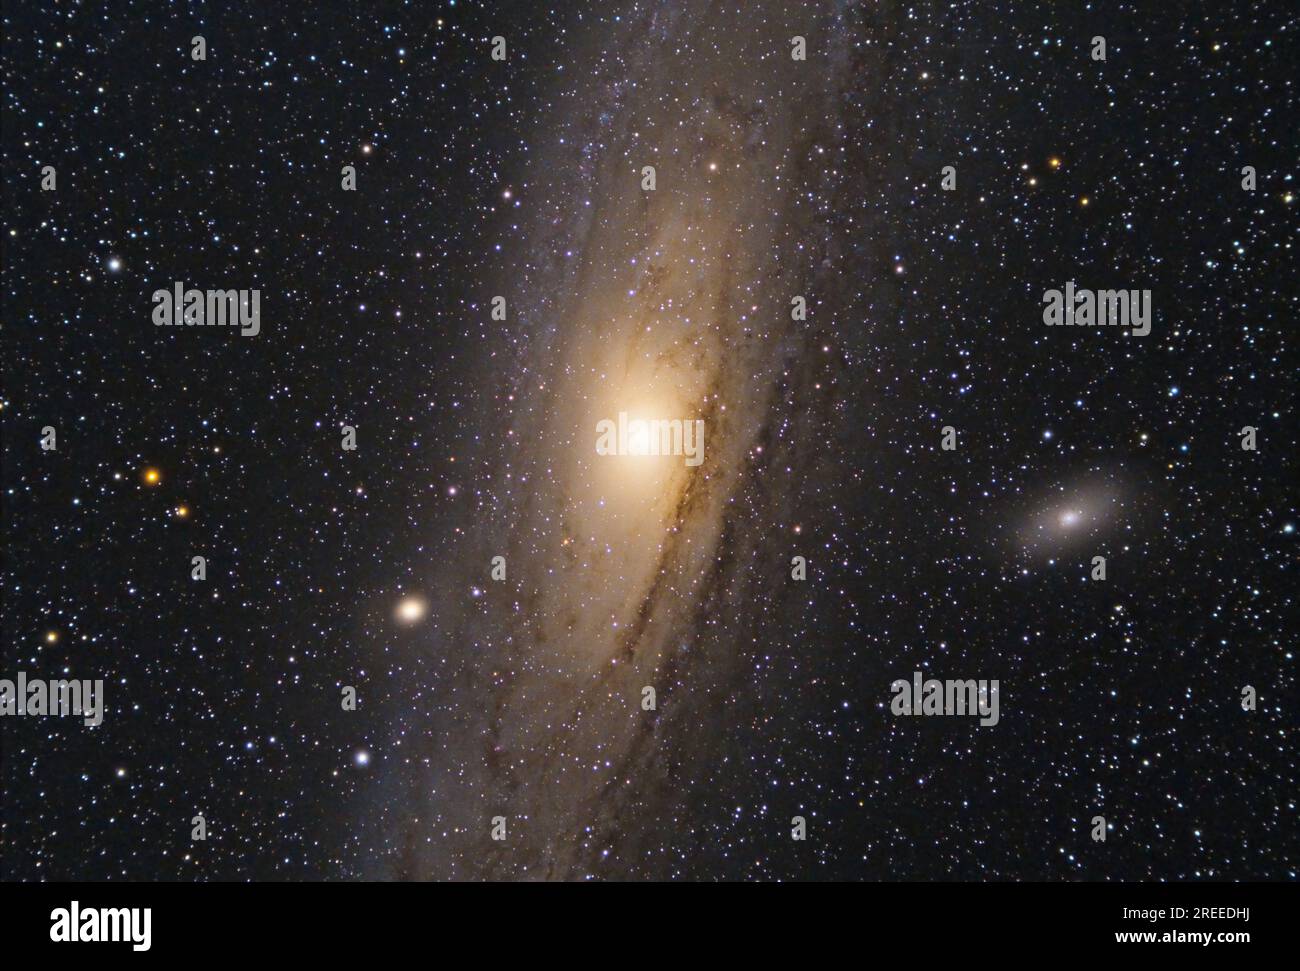 Andromeda Galaxy, Messier 31 and its satellite galaxies, Messier 32 and Messier 110, in the constellation Andromeda Stock Photo